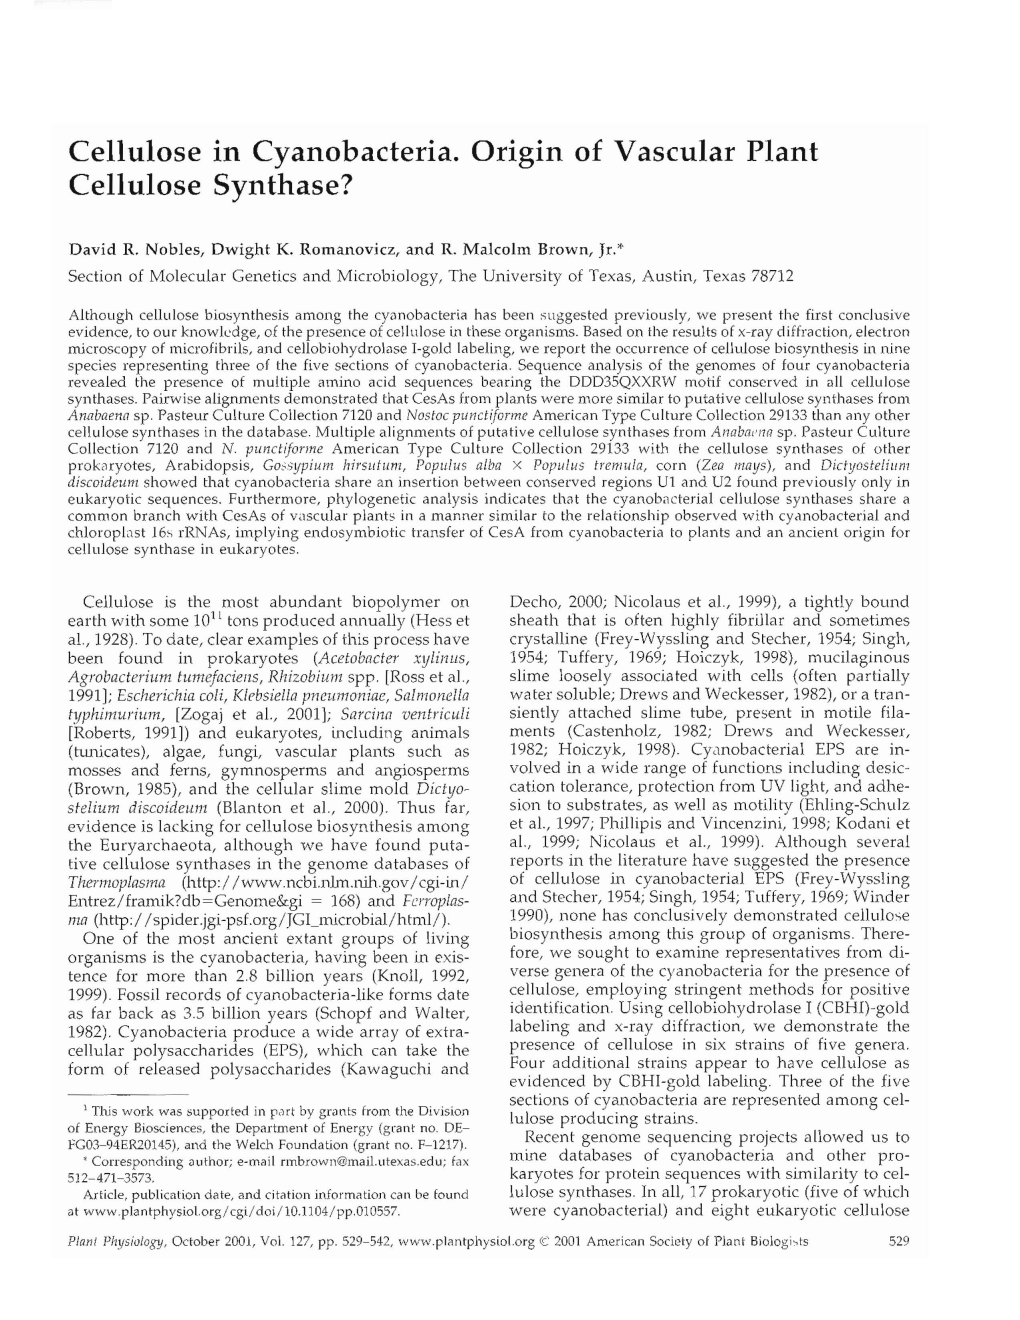 Cellulose in Cyanobacteria. Origin of Vascular Plant Cellulose Synthase?